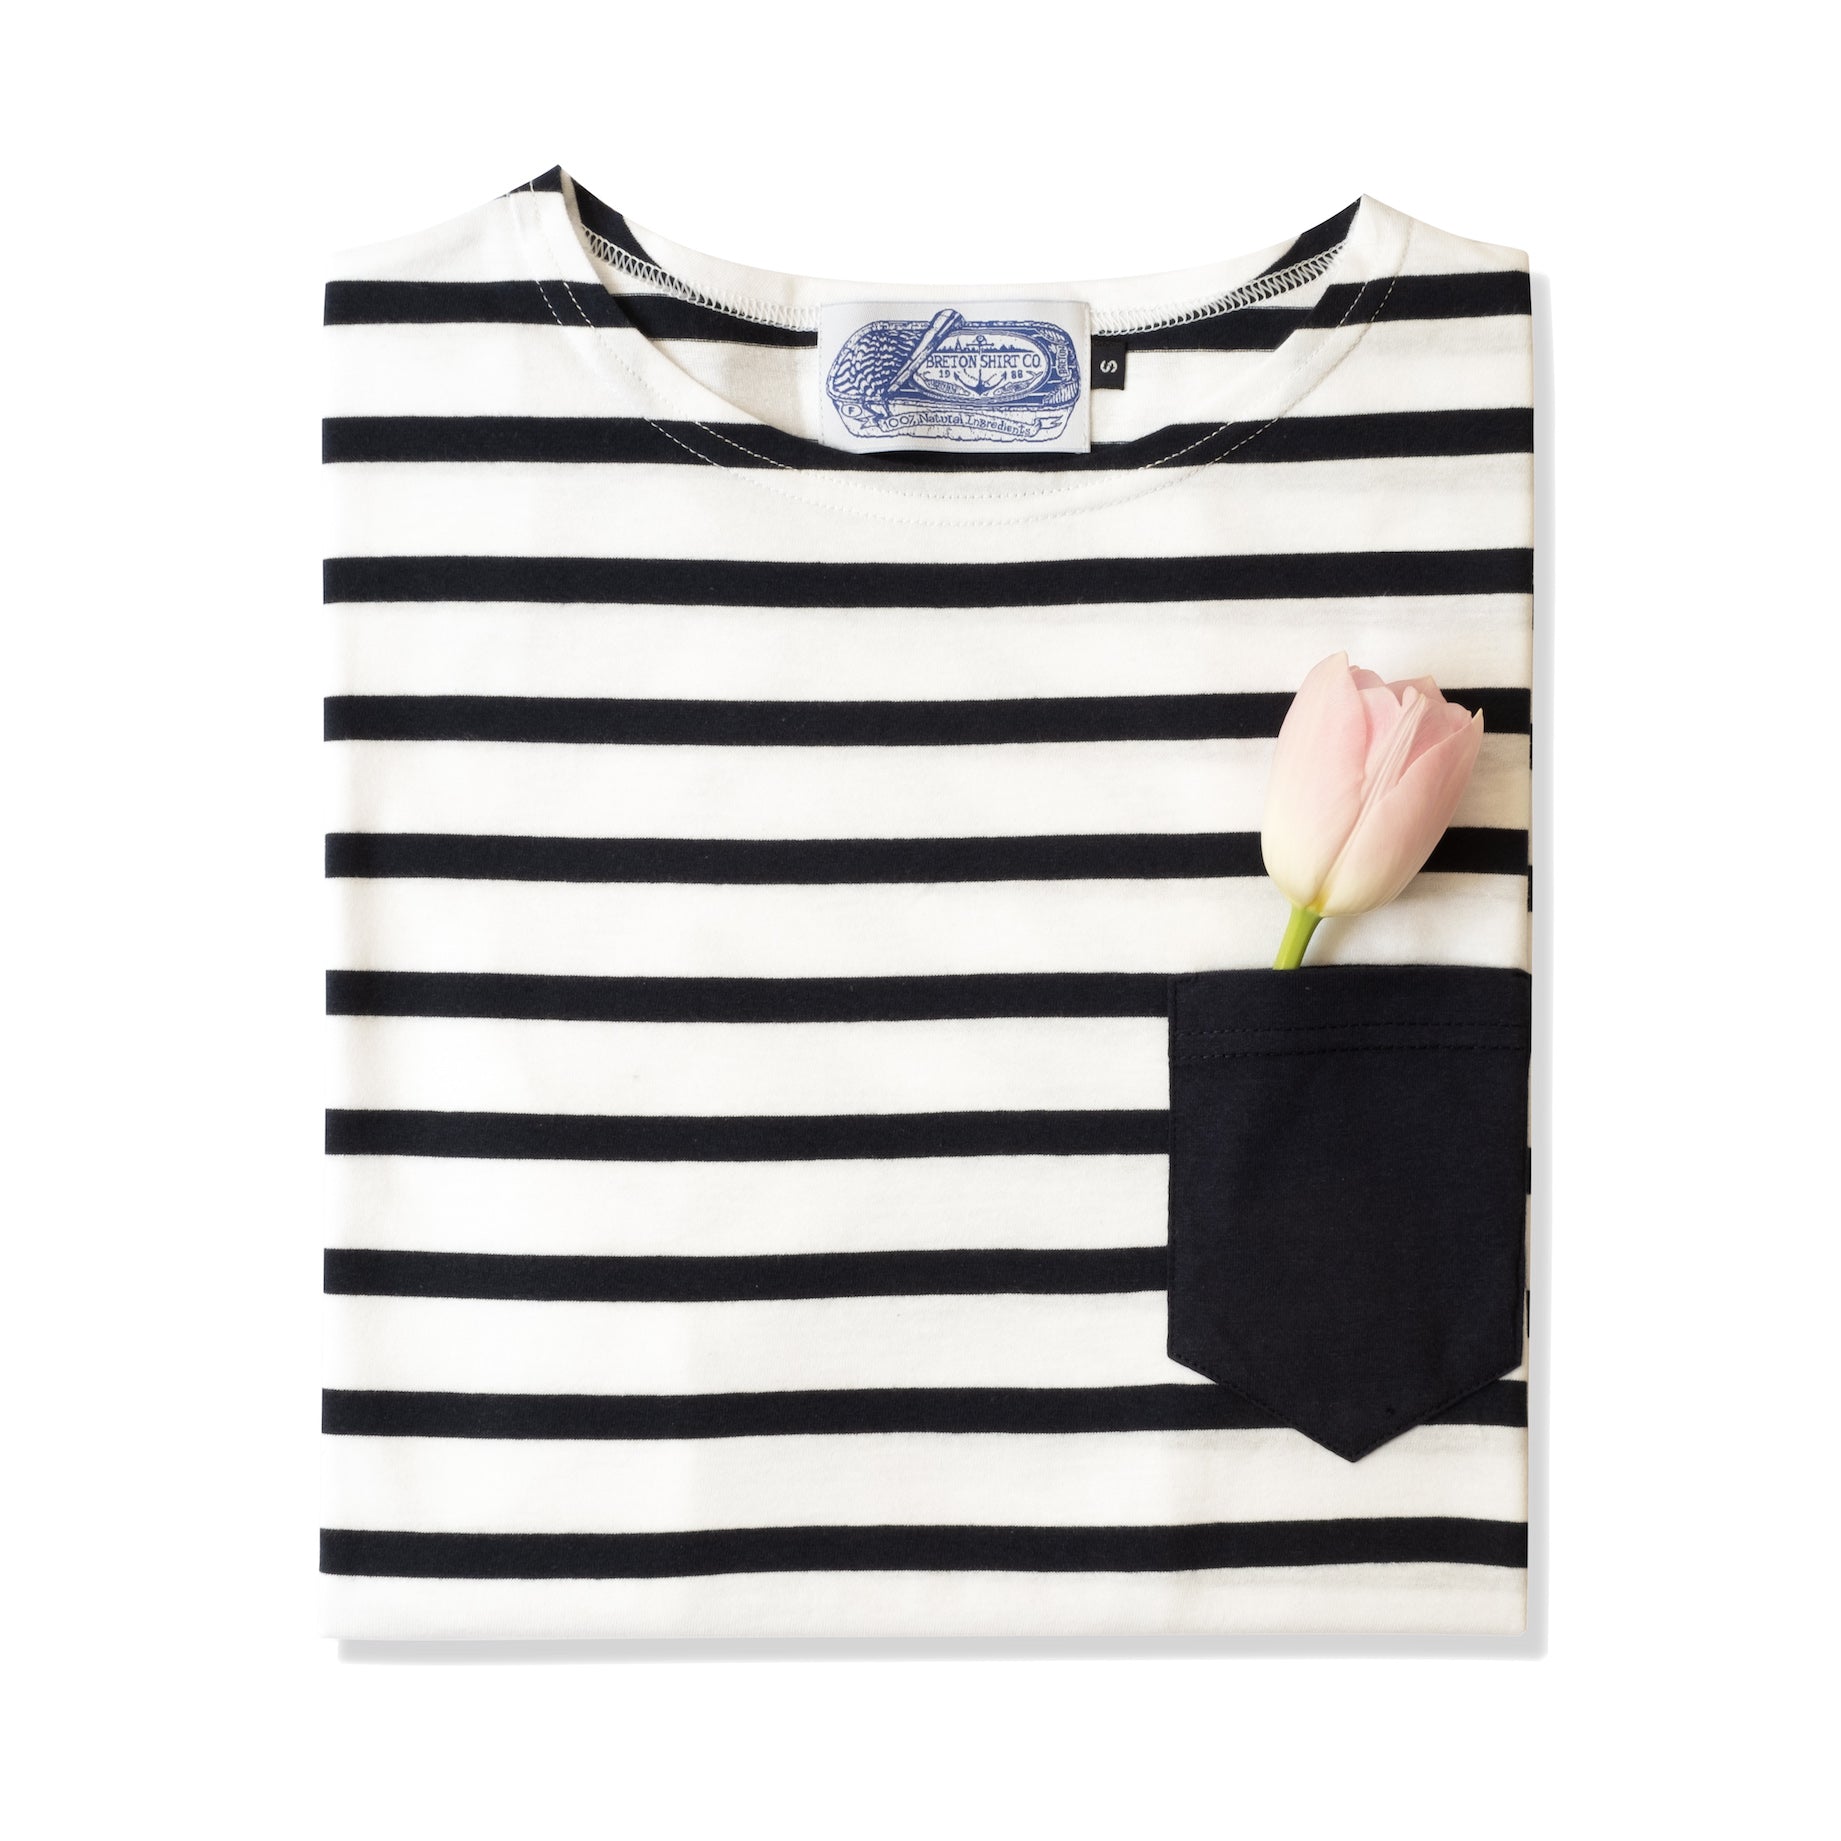 All You Need is Love: Easy Ways to Care for Your Breton Shirt